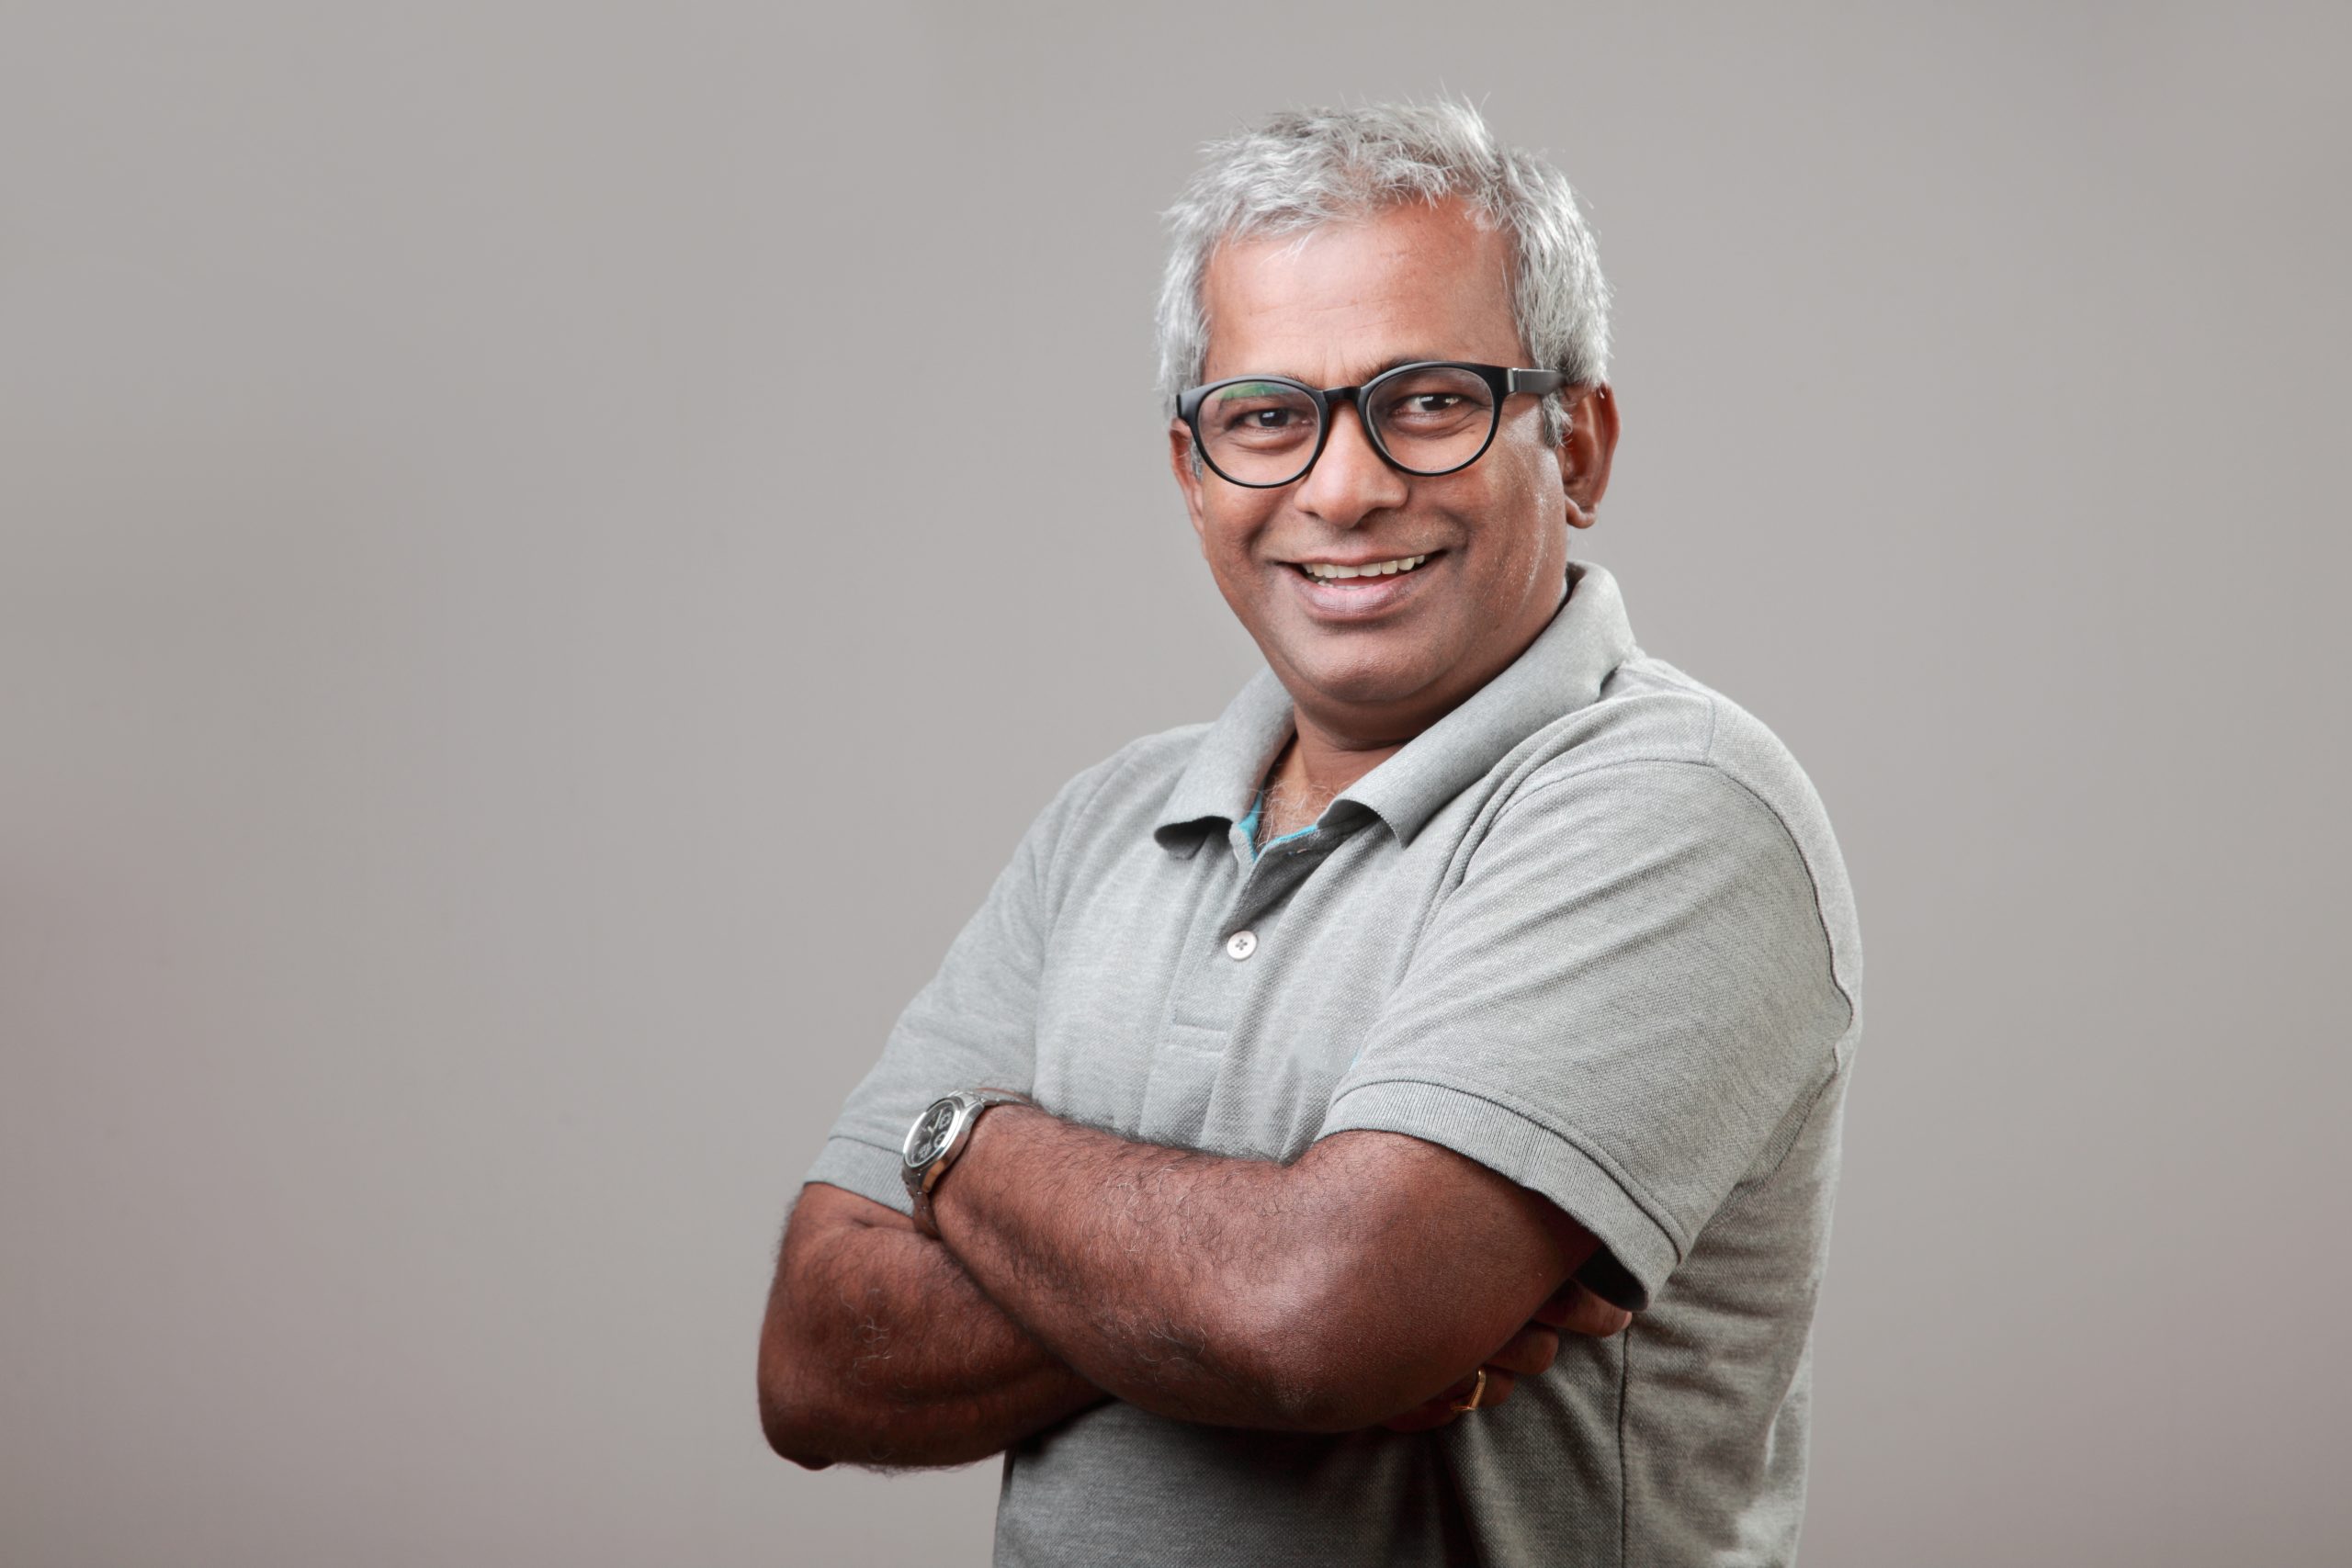 Middle Aged man wearing glasses smiling at the camera with his arms crossed